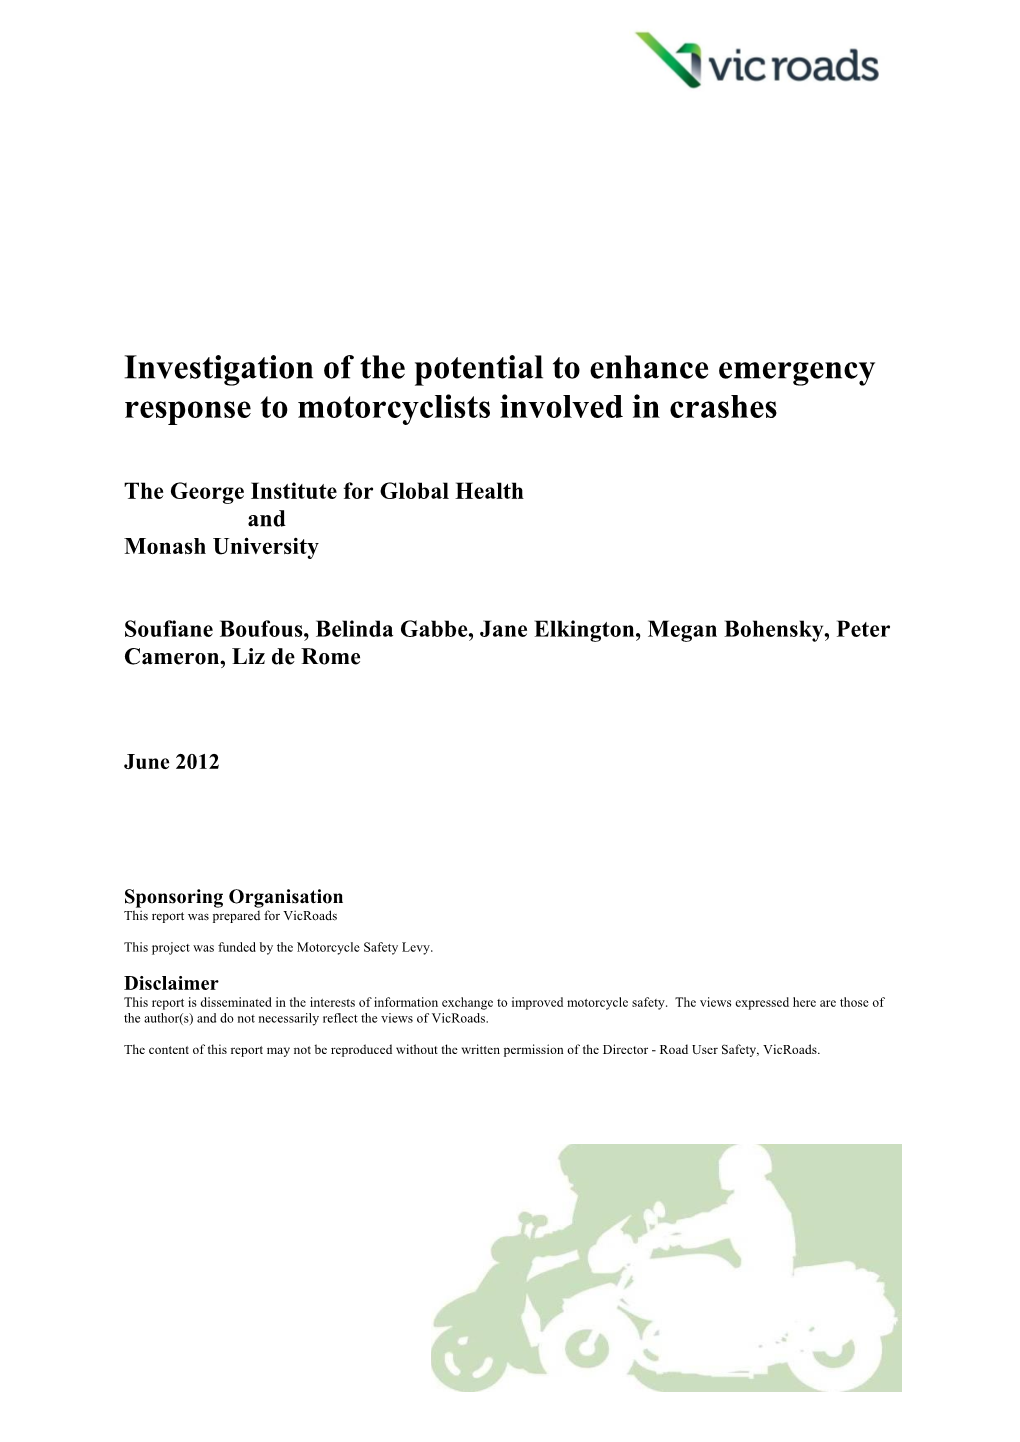 Investigation of the Potential to Enhance Emergency Response to Motorcyclists Involved in Crashes